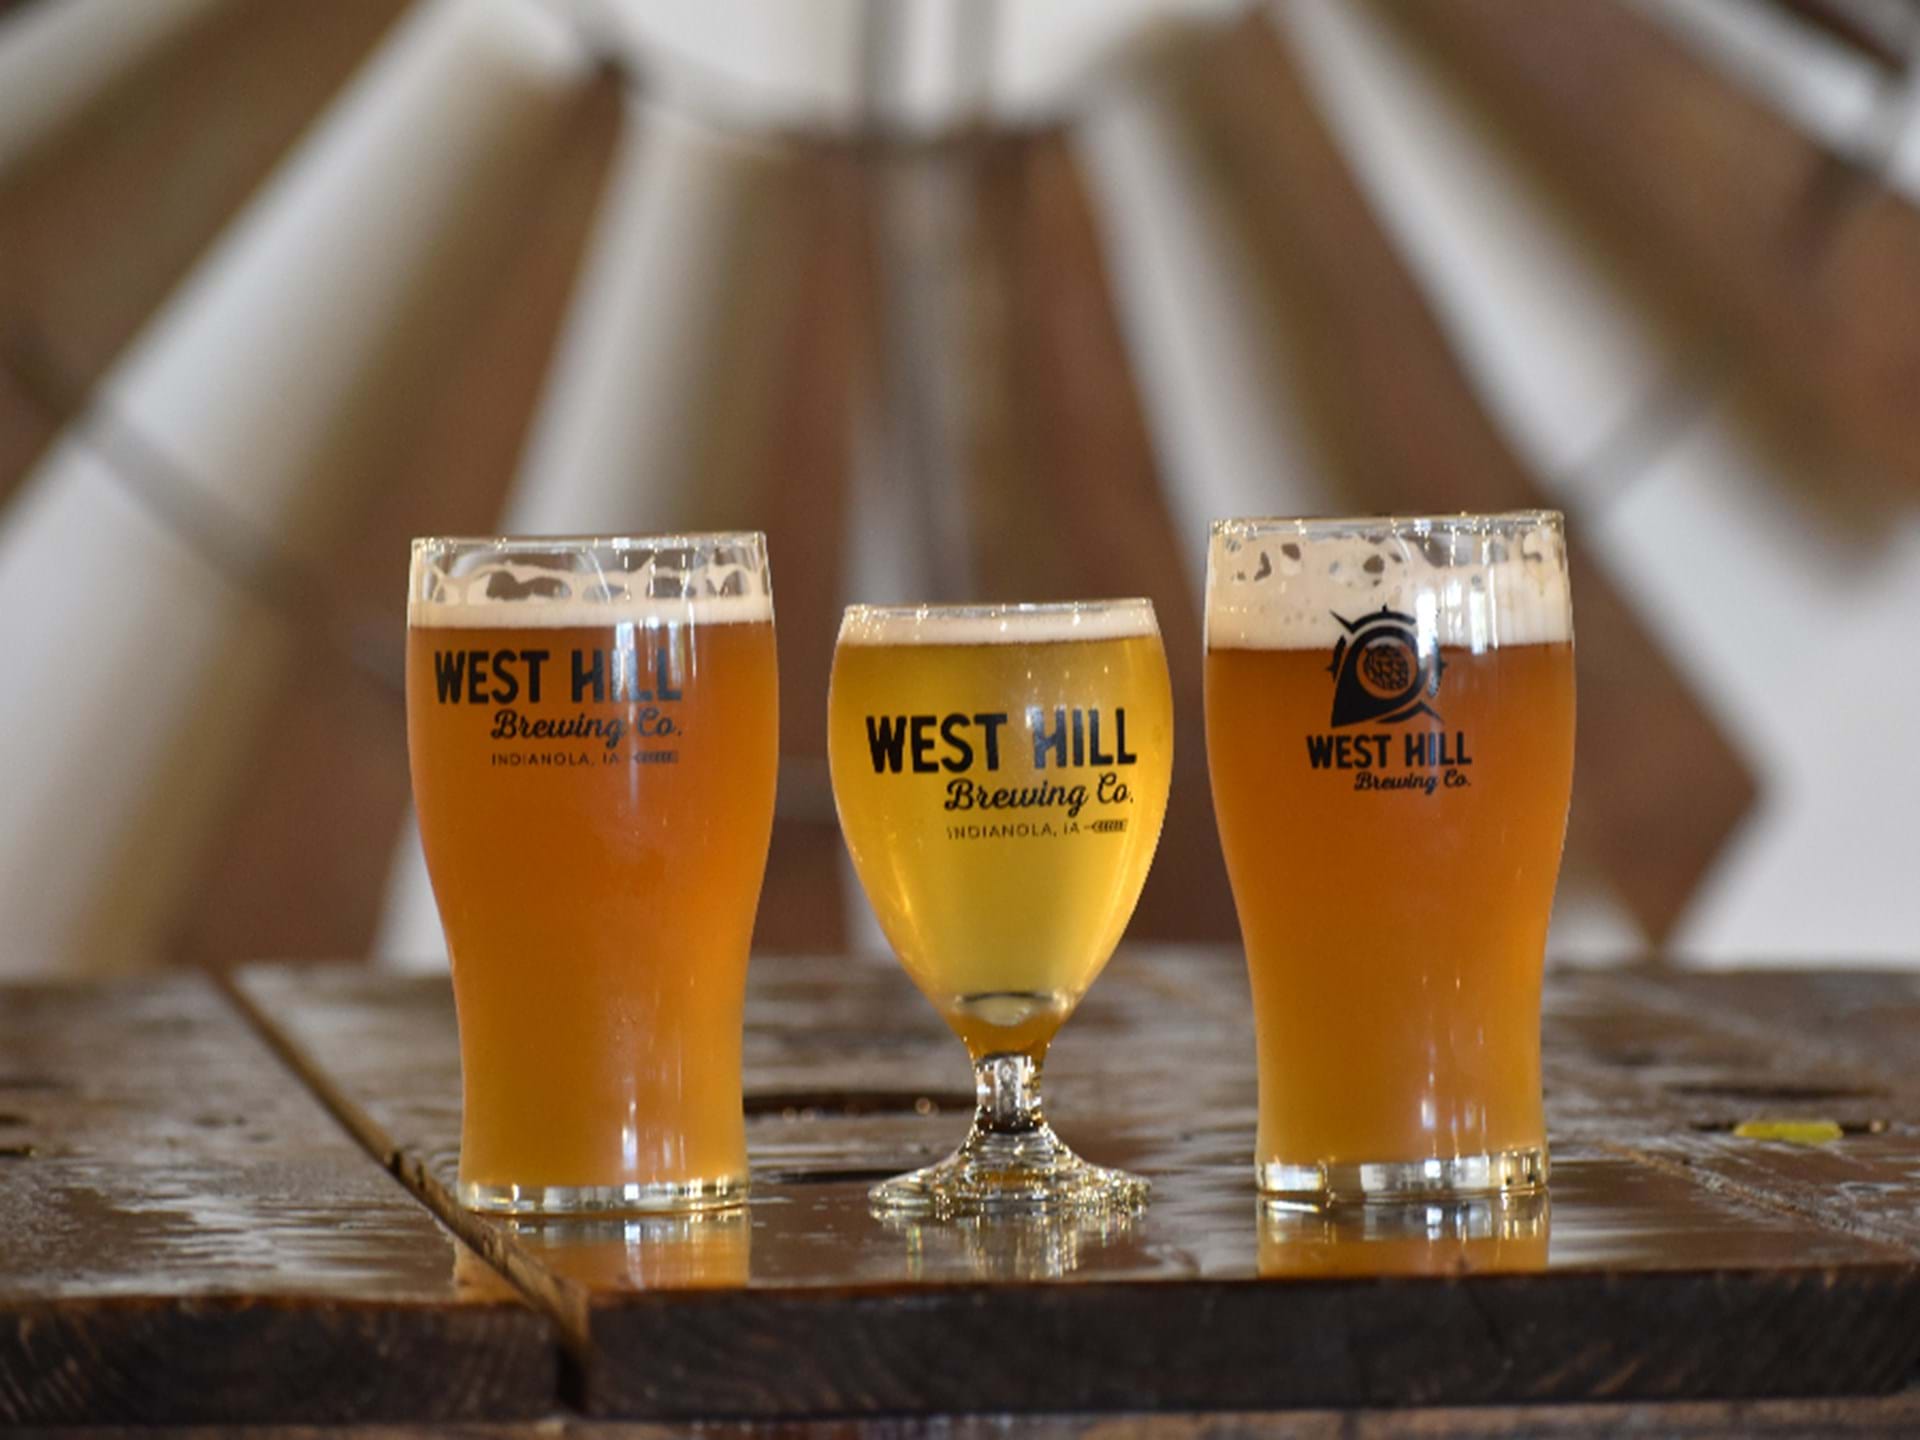 West Hill Brewing co. beer samples against their feature wall